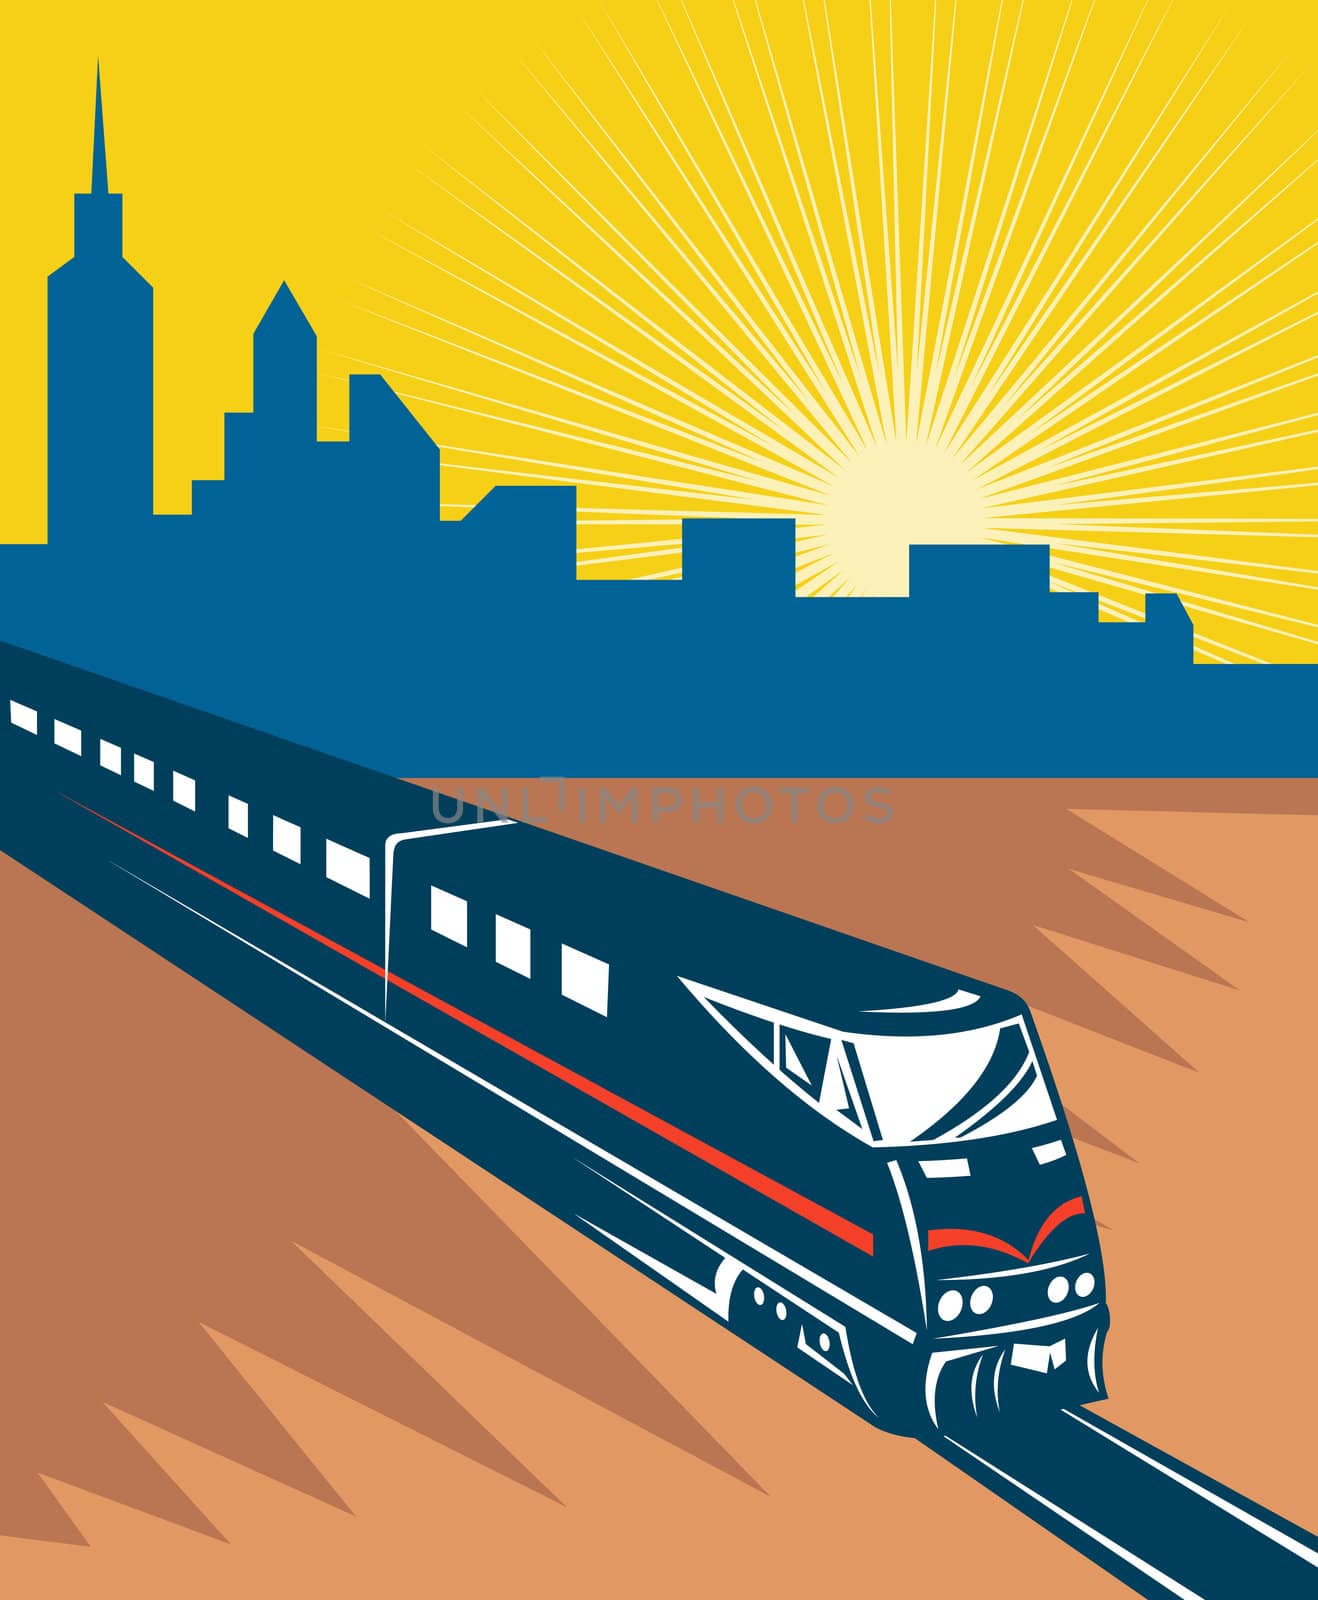 illustration of a Speeding passenger train city skyline in the background done in retro style.